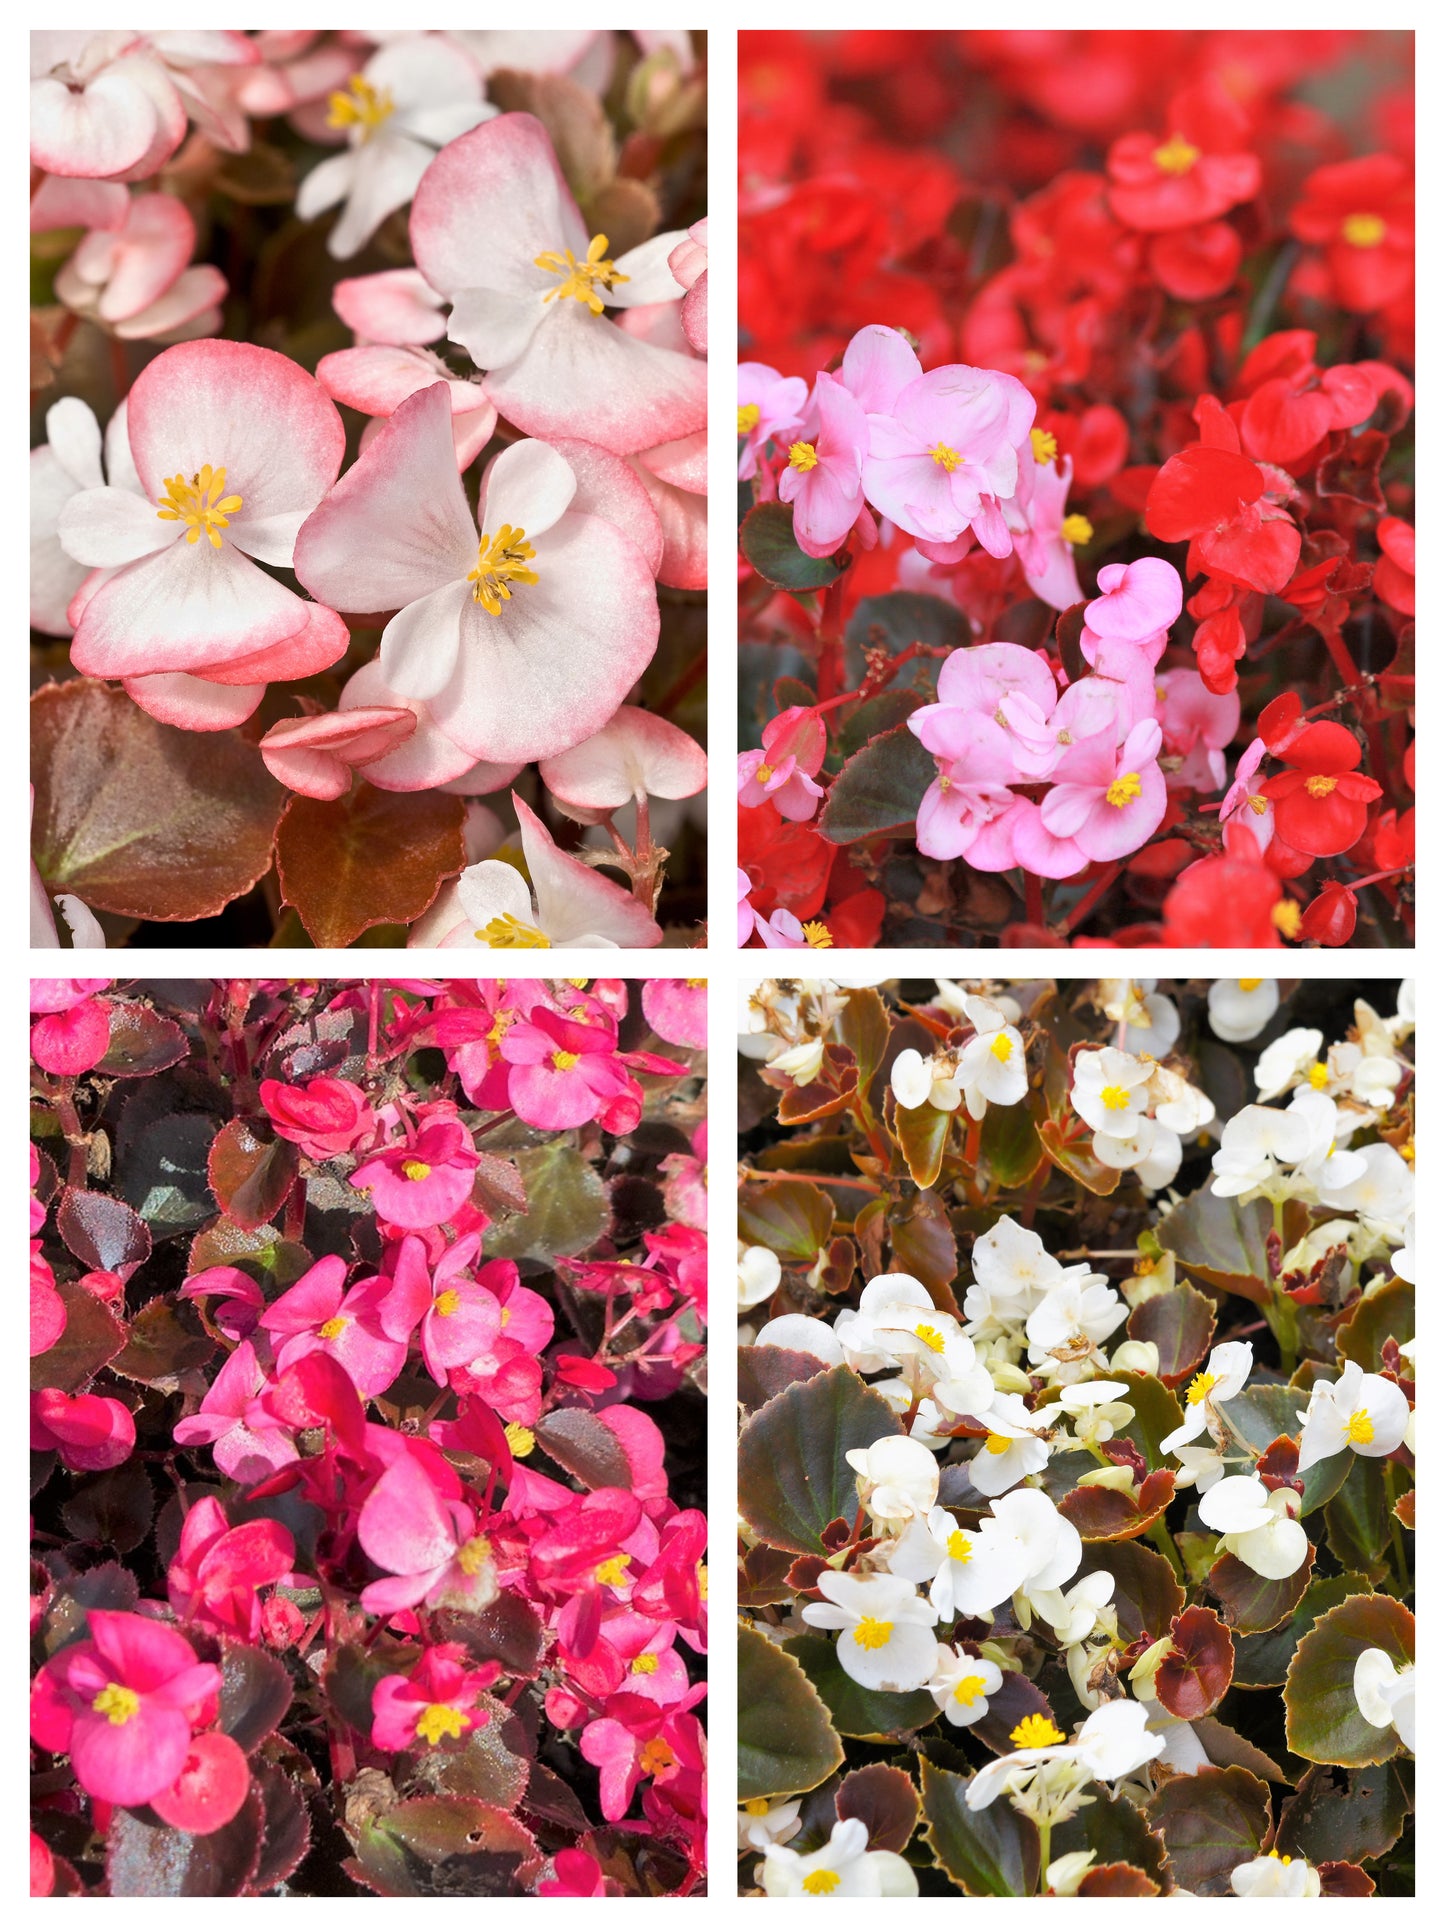 25 WAX MIXED BEGONIA Semperflorens Fibrous Mixed Colors Red Pink White Two Tone Shade Flower Seeds